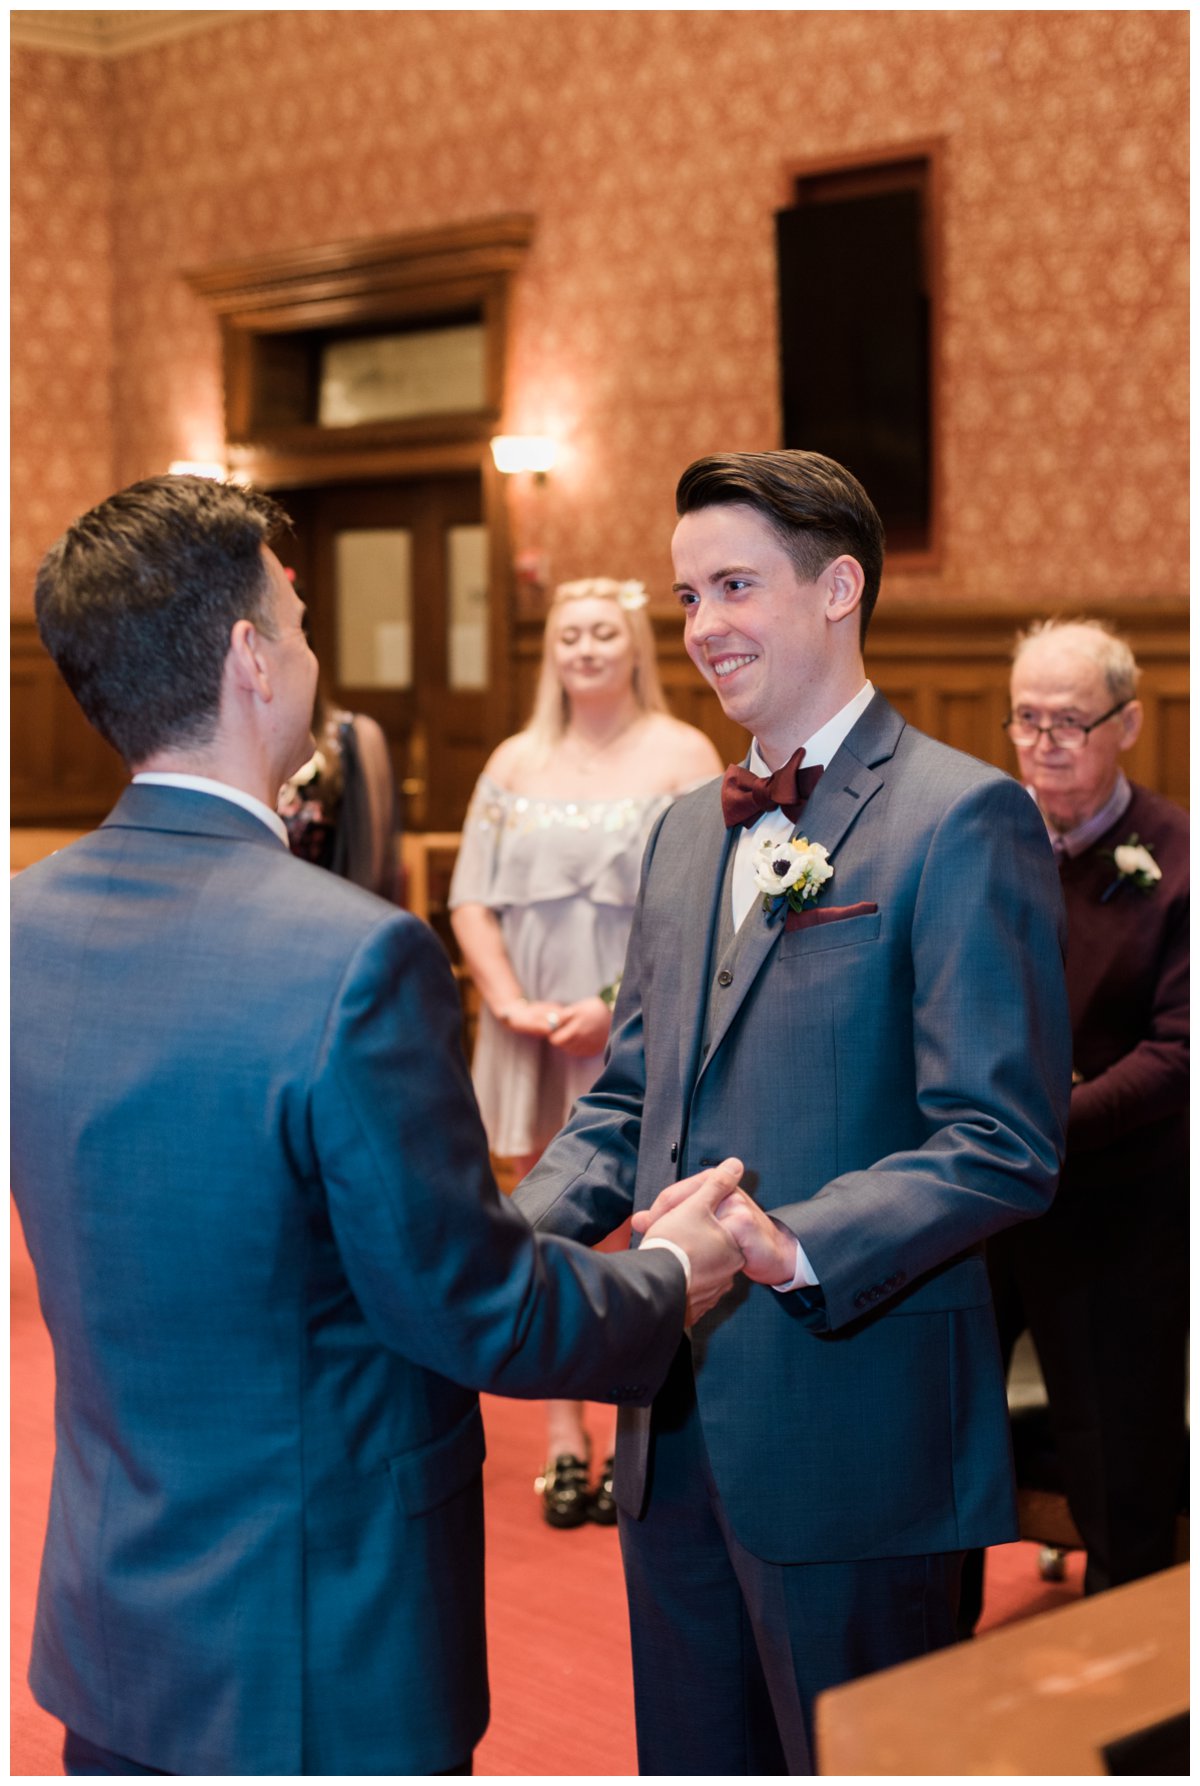 Grooms getting married at Cambridge city hall